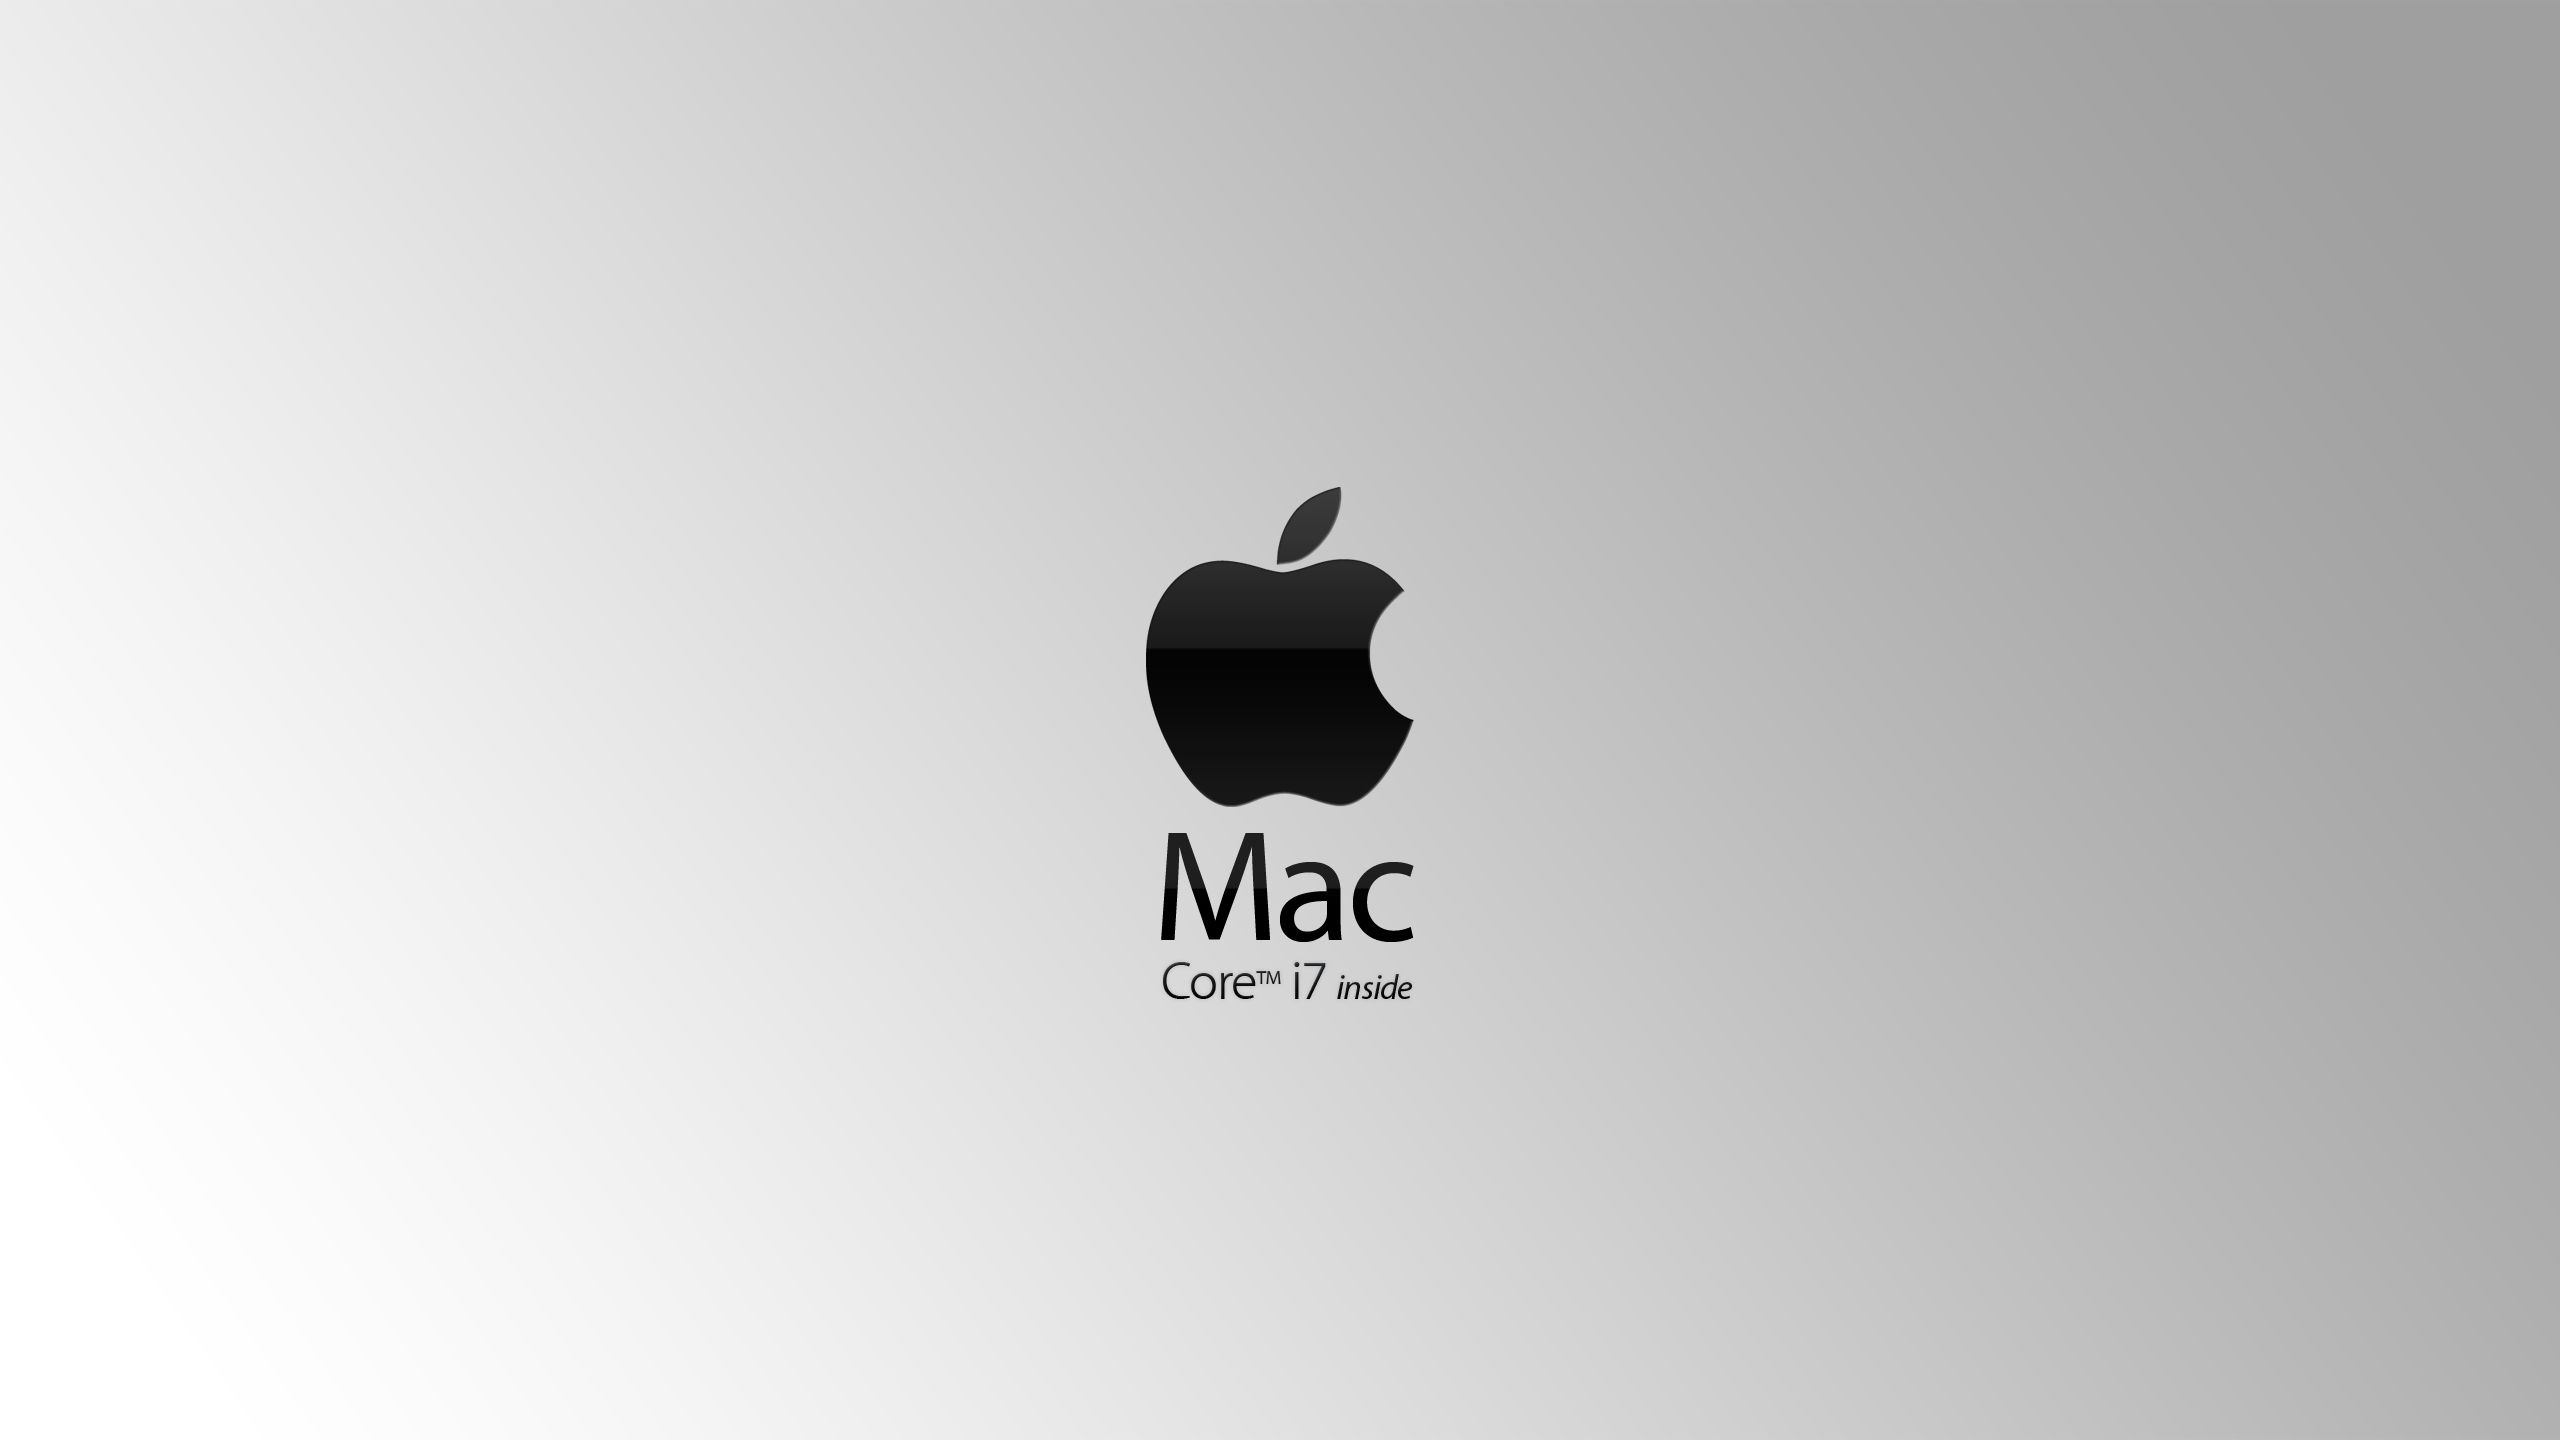 Free download Best Imac Wallpapers [2560x1440] for your Desktop, Mobile &  Tablet | Explore 74+ Cool Imac Backgrounds | Imac Backgrounds, Imac  Wallpapers, Imac Desktop Backgrounds